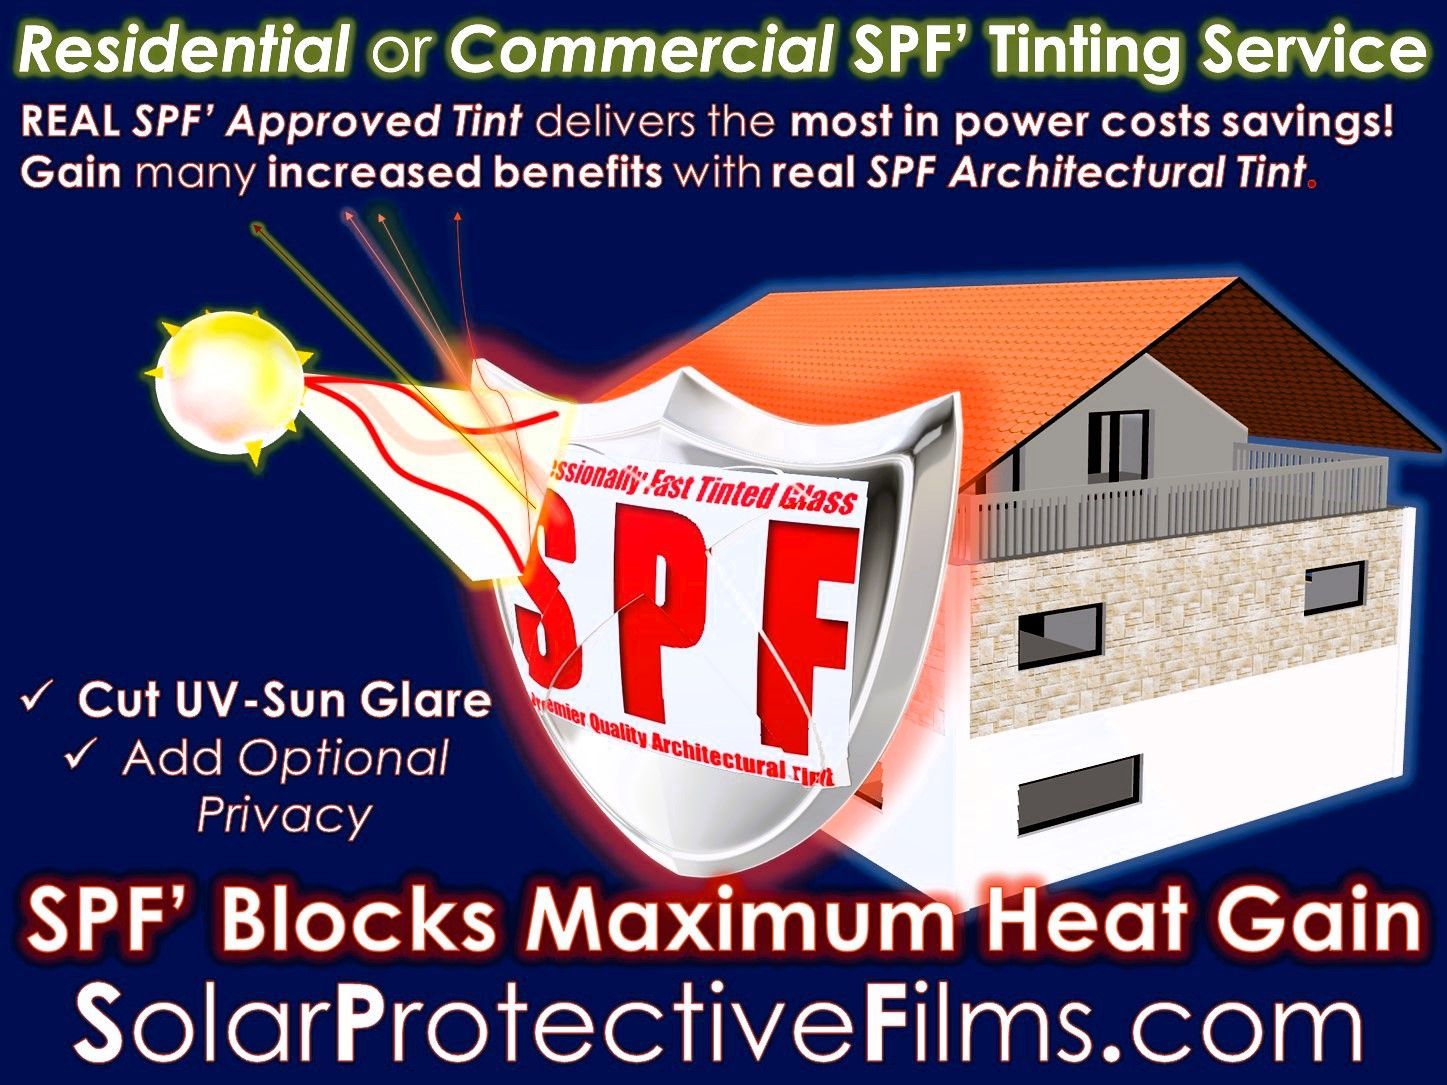 SPF Window Tinting - Architectural Tint services brand Logo